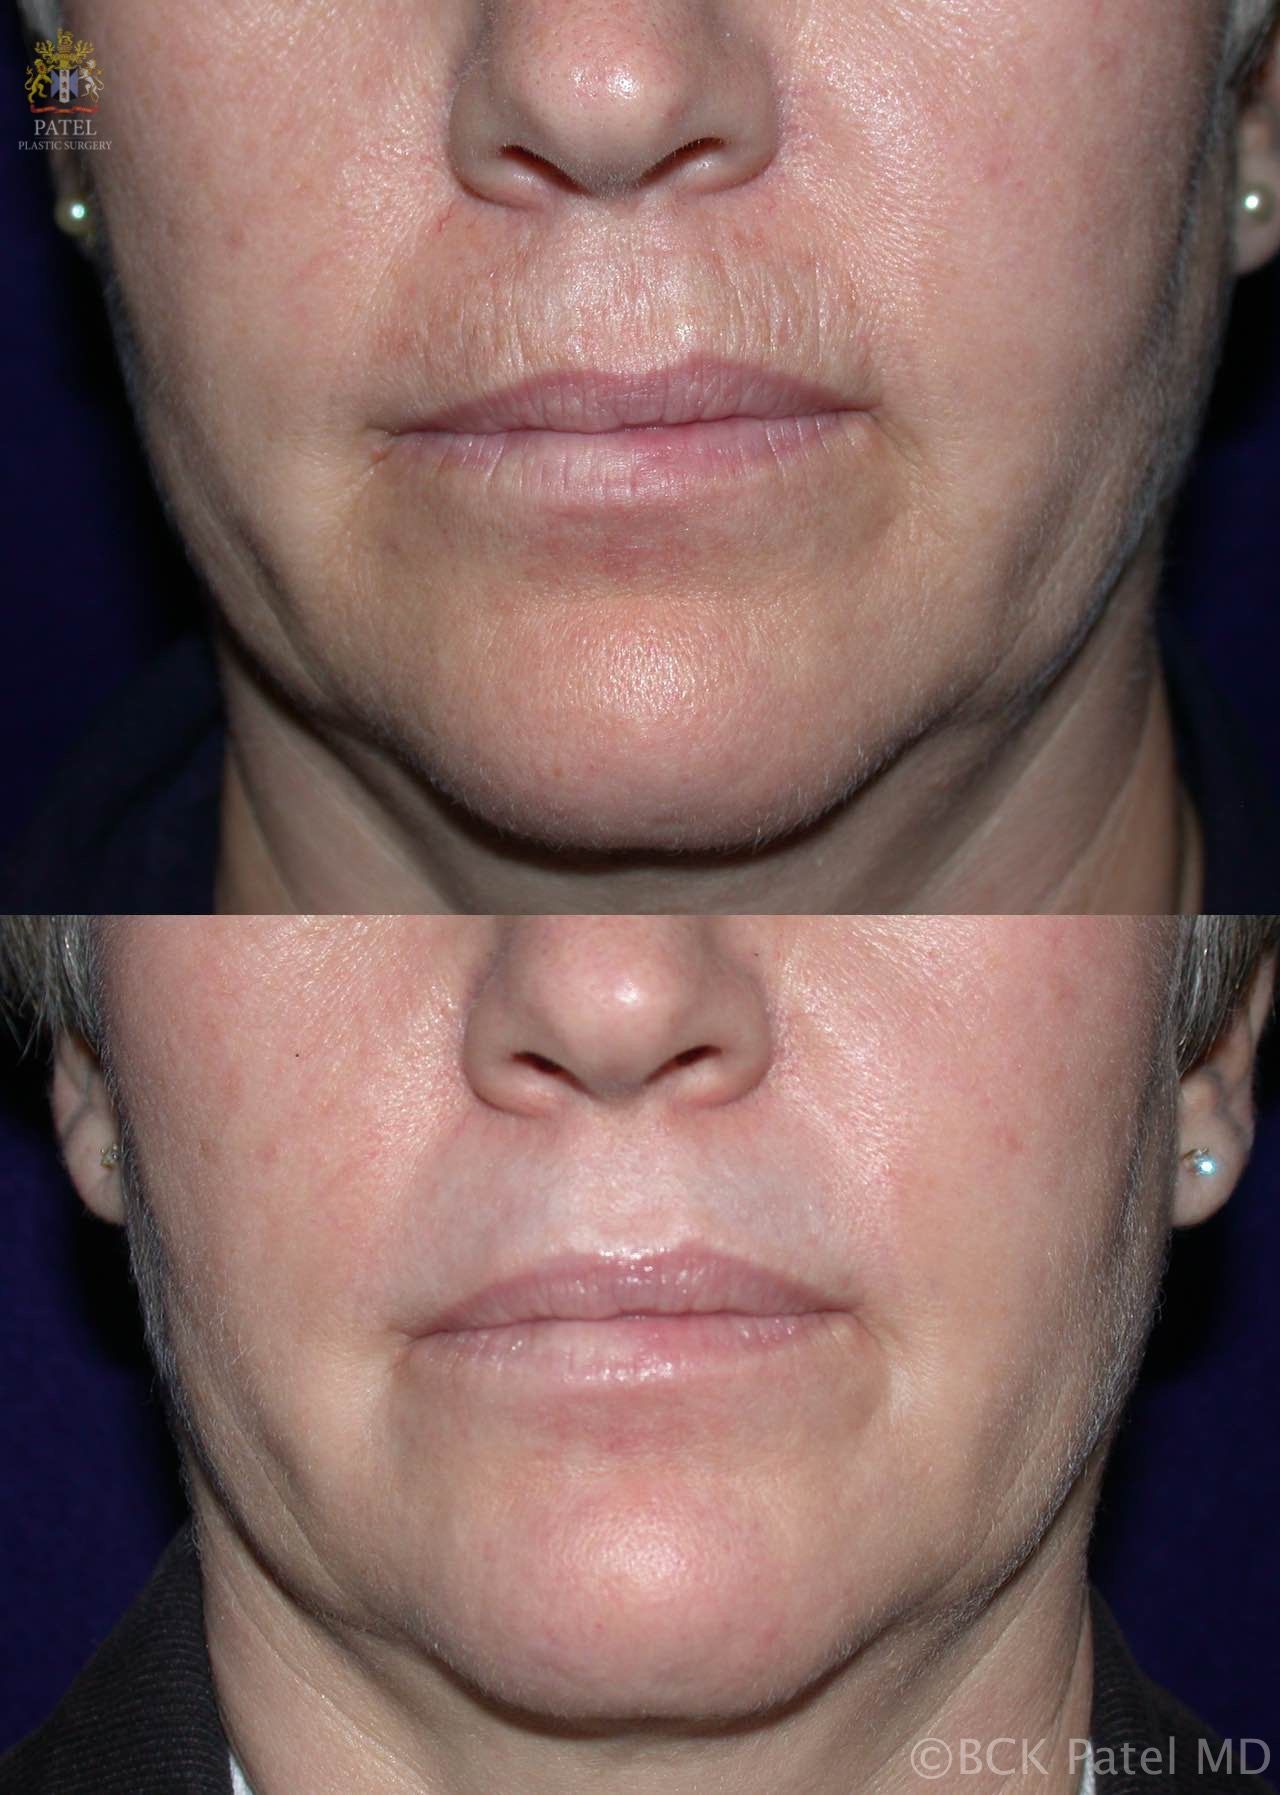 Nice improvement in the smoker's lines around the mouth, marionette lines after CO2 laser by Dr. BCK Patel MD, FRCS, Salt Lake City, London, St George